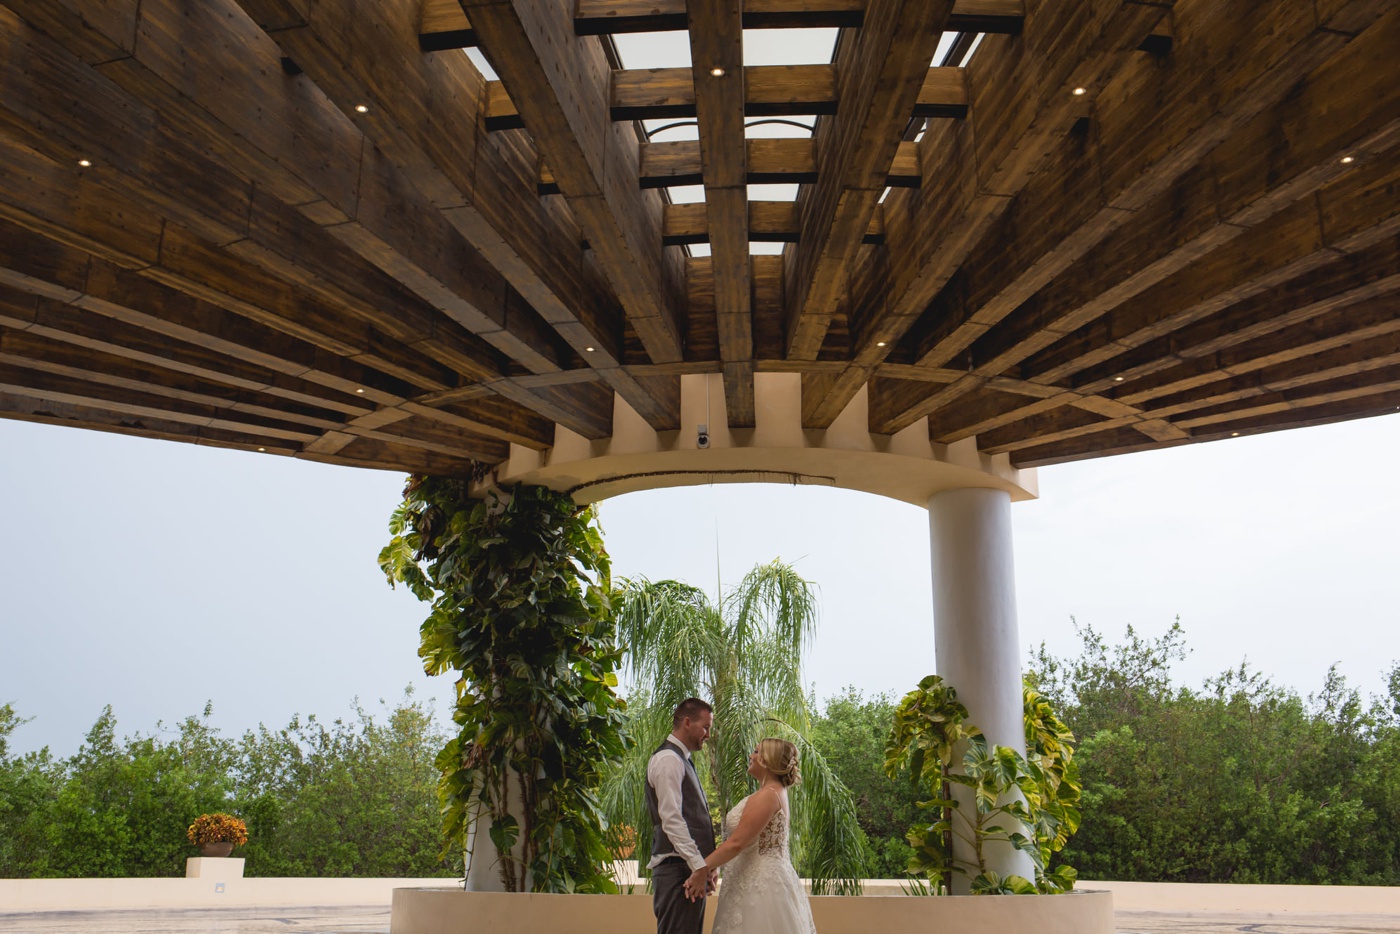 Cost of a destination wedding at an all-inclusive resort